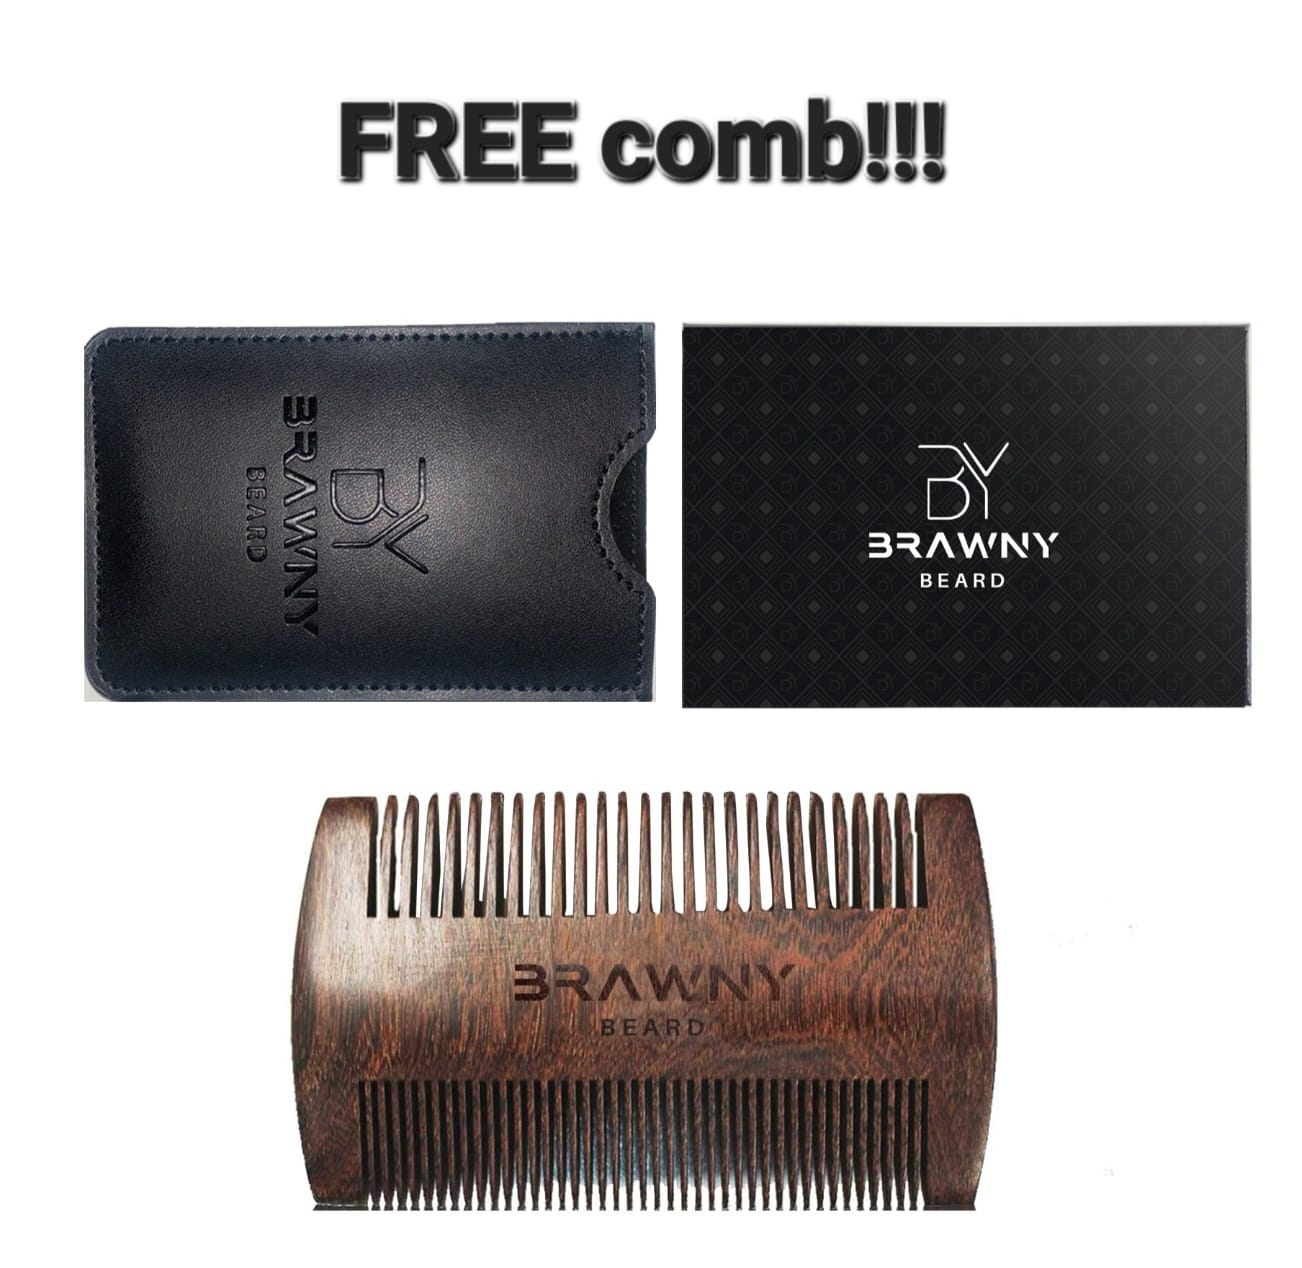 Executive Beard Oil With Free Comb